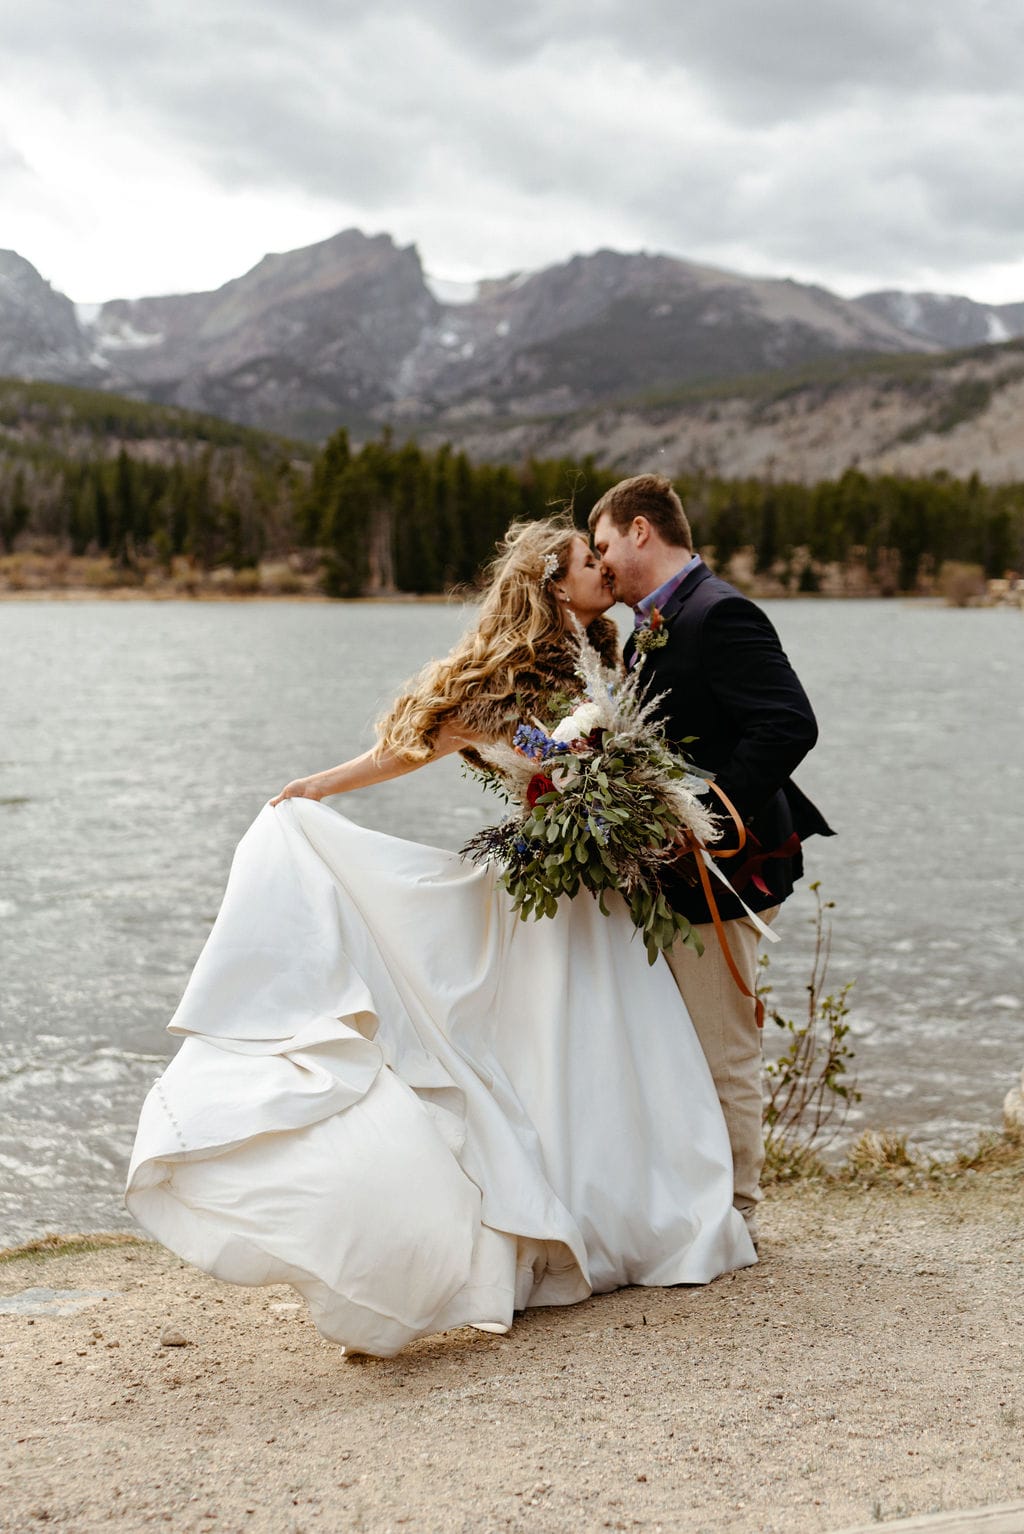 Bride and groom at their windy wedding ceremony at sprague lake in rocky mountain national park